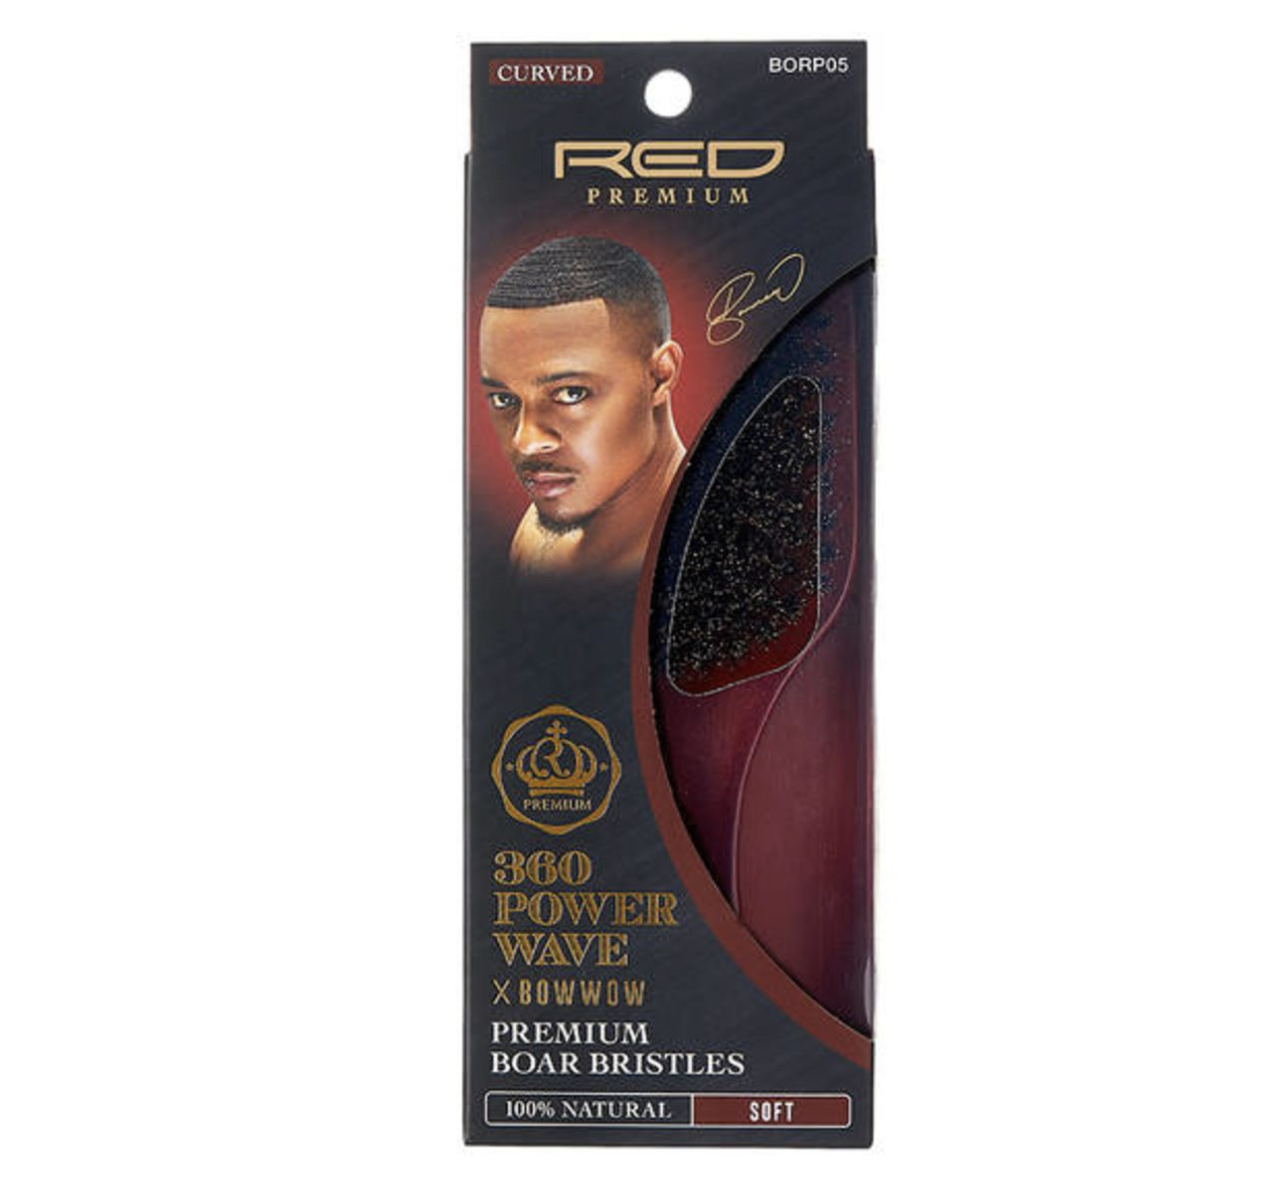 RED PREMIUM | 360 Power Wave Club Boar Brush Curved (Soft) BORP05 - BPolished Beauty Supply